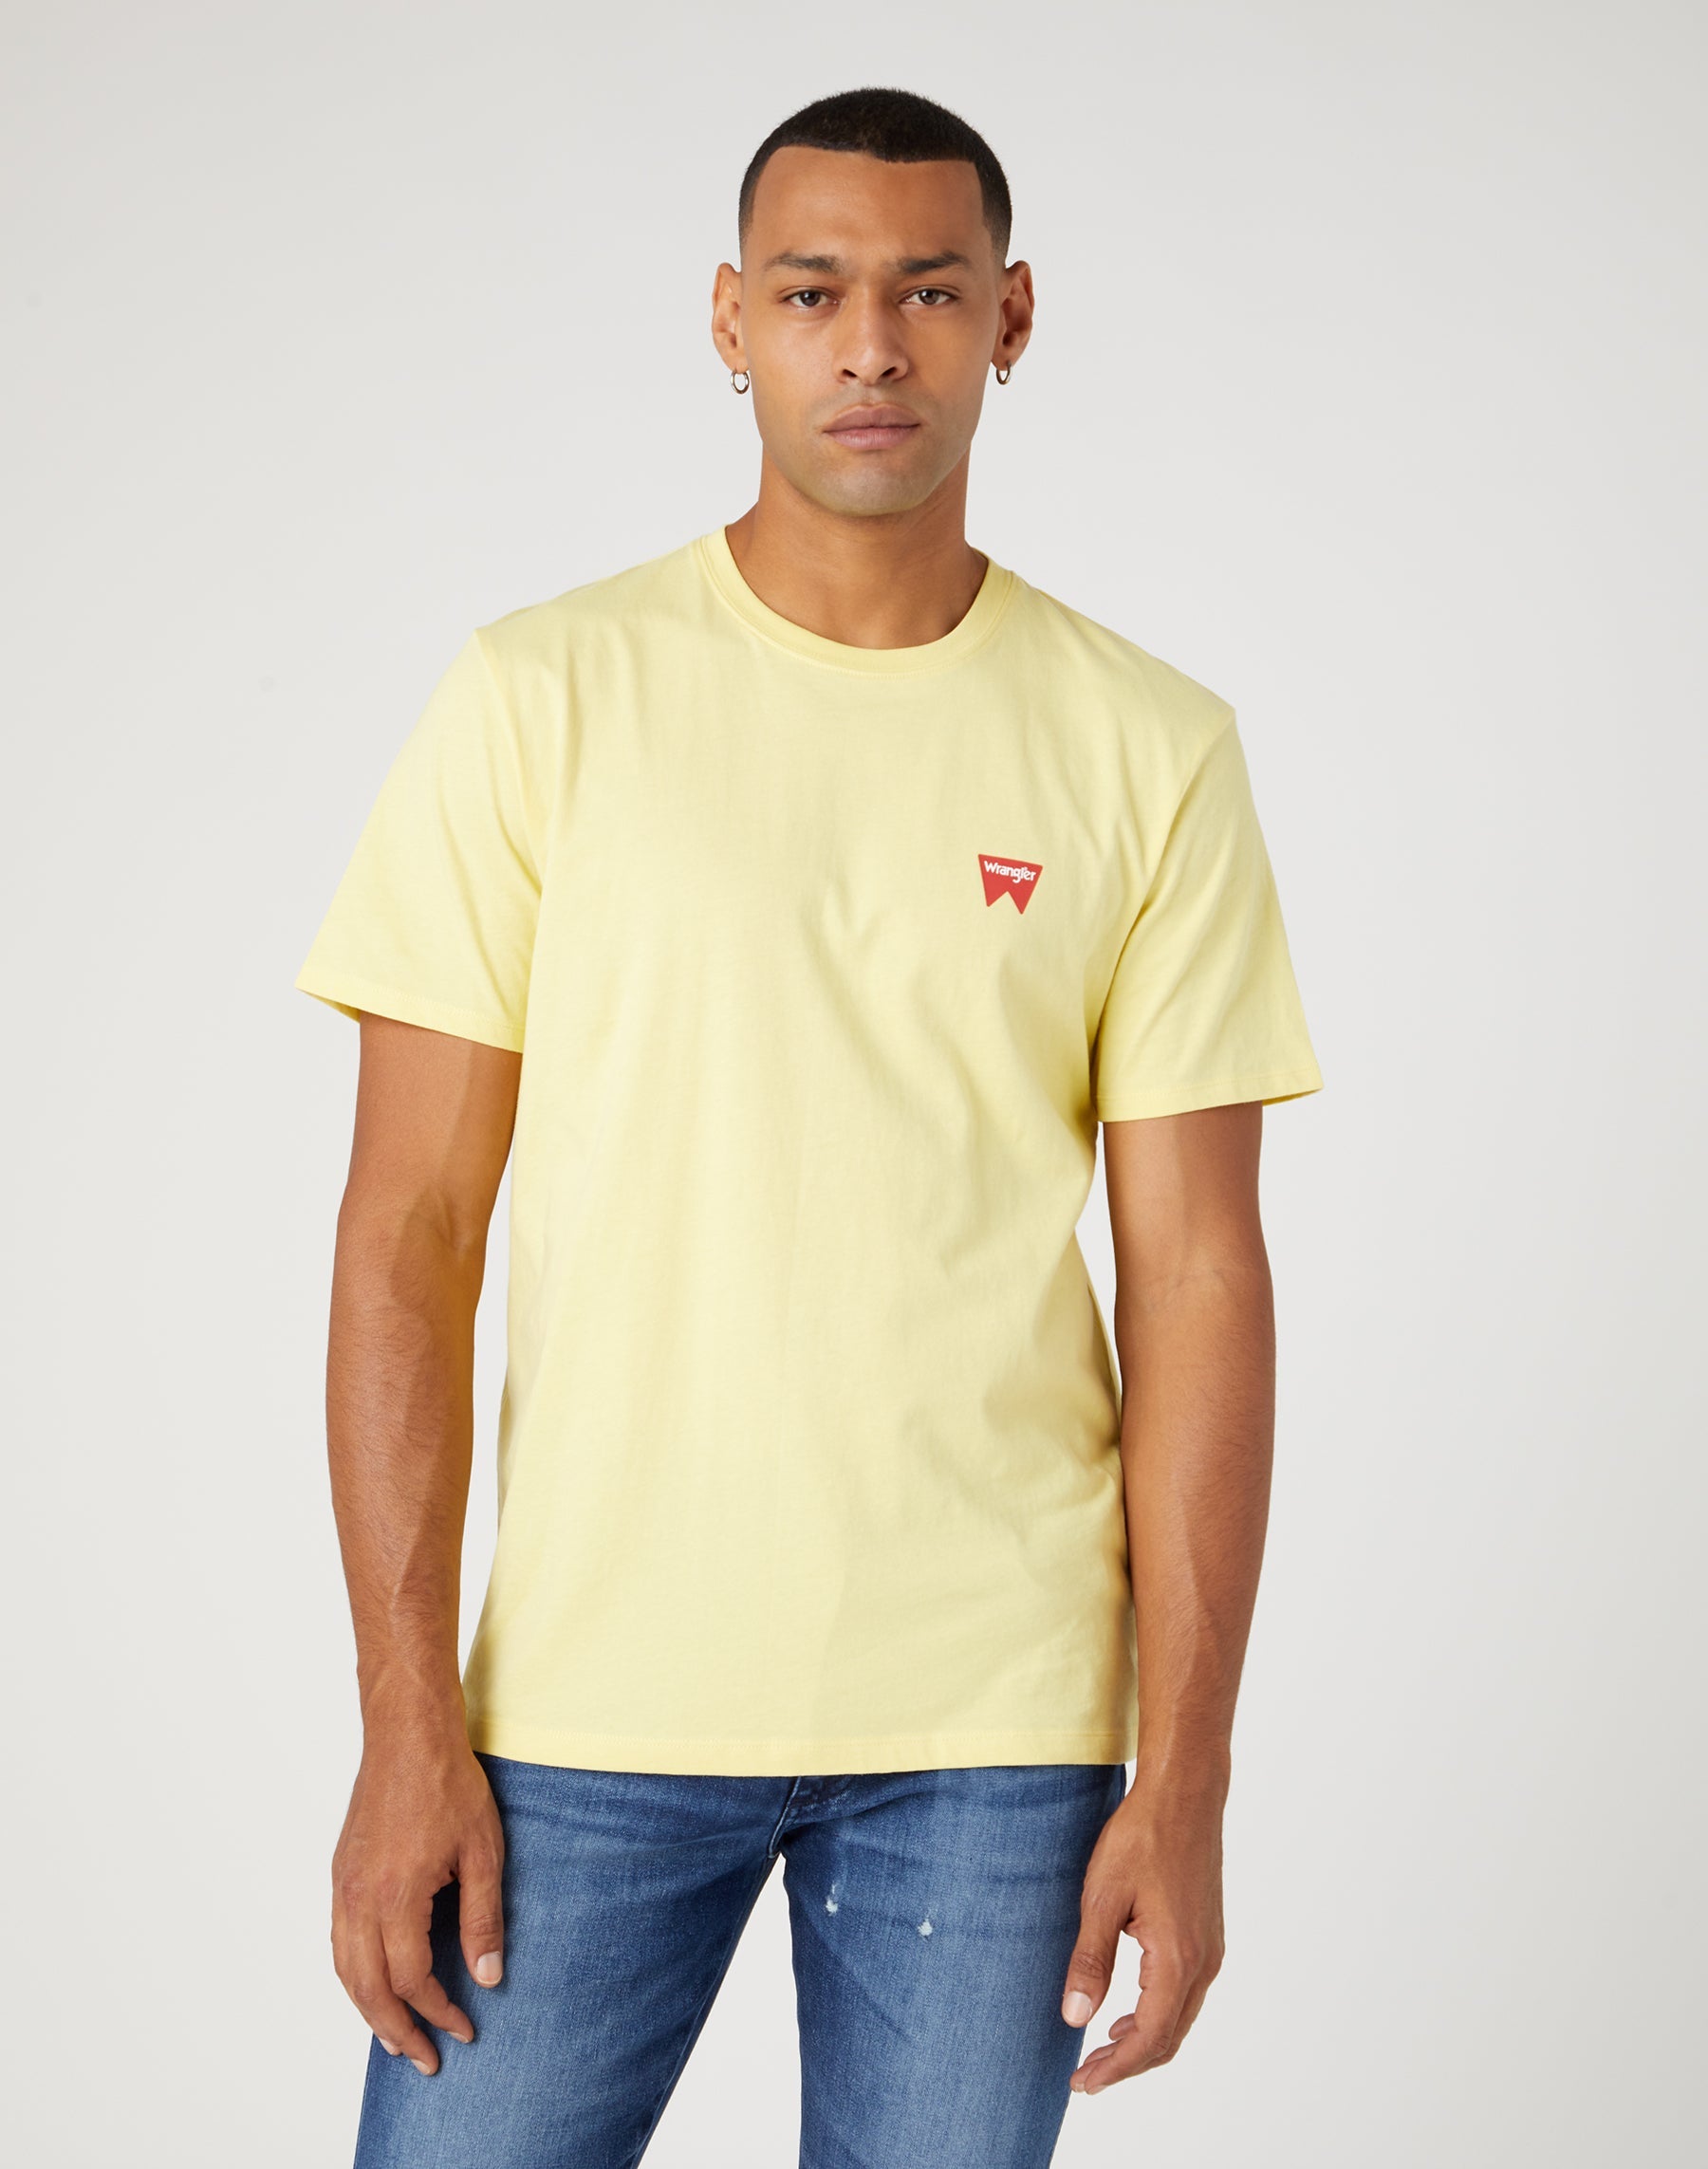 Sign Off Tee in Pineapple Slice T-Shirts Wrangler   